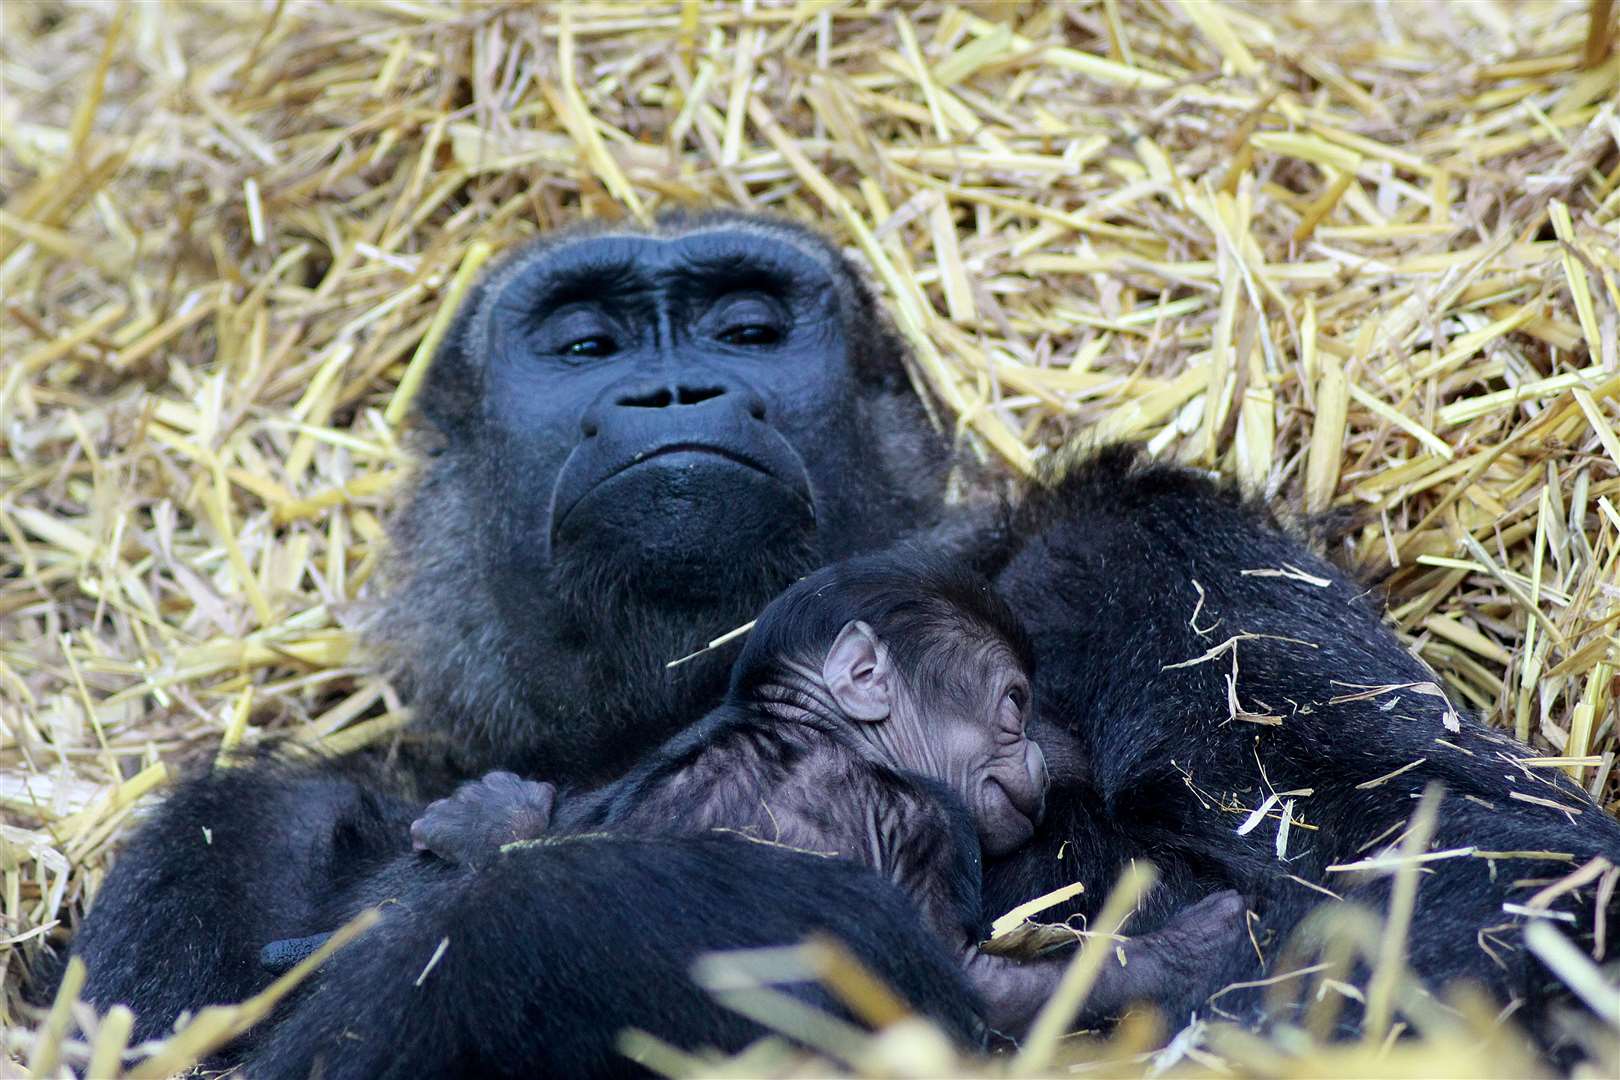 The mum is being very protective of her newborn. Photo credit: Leanne Smith